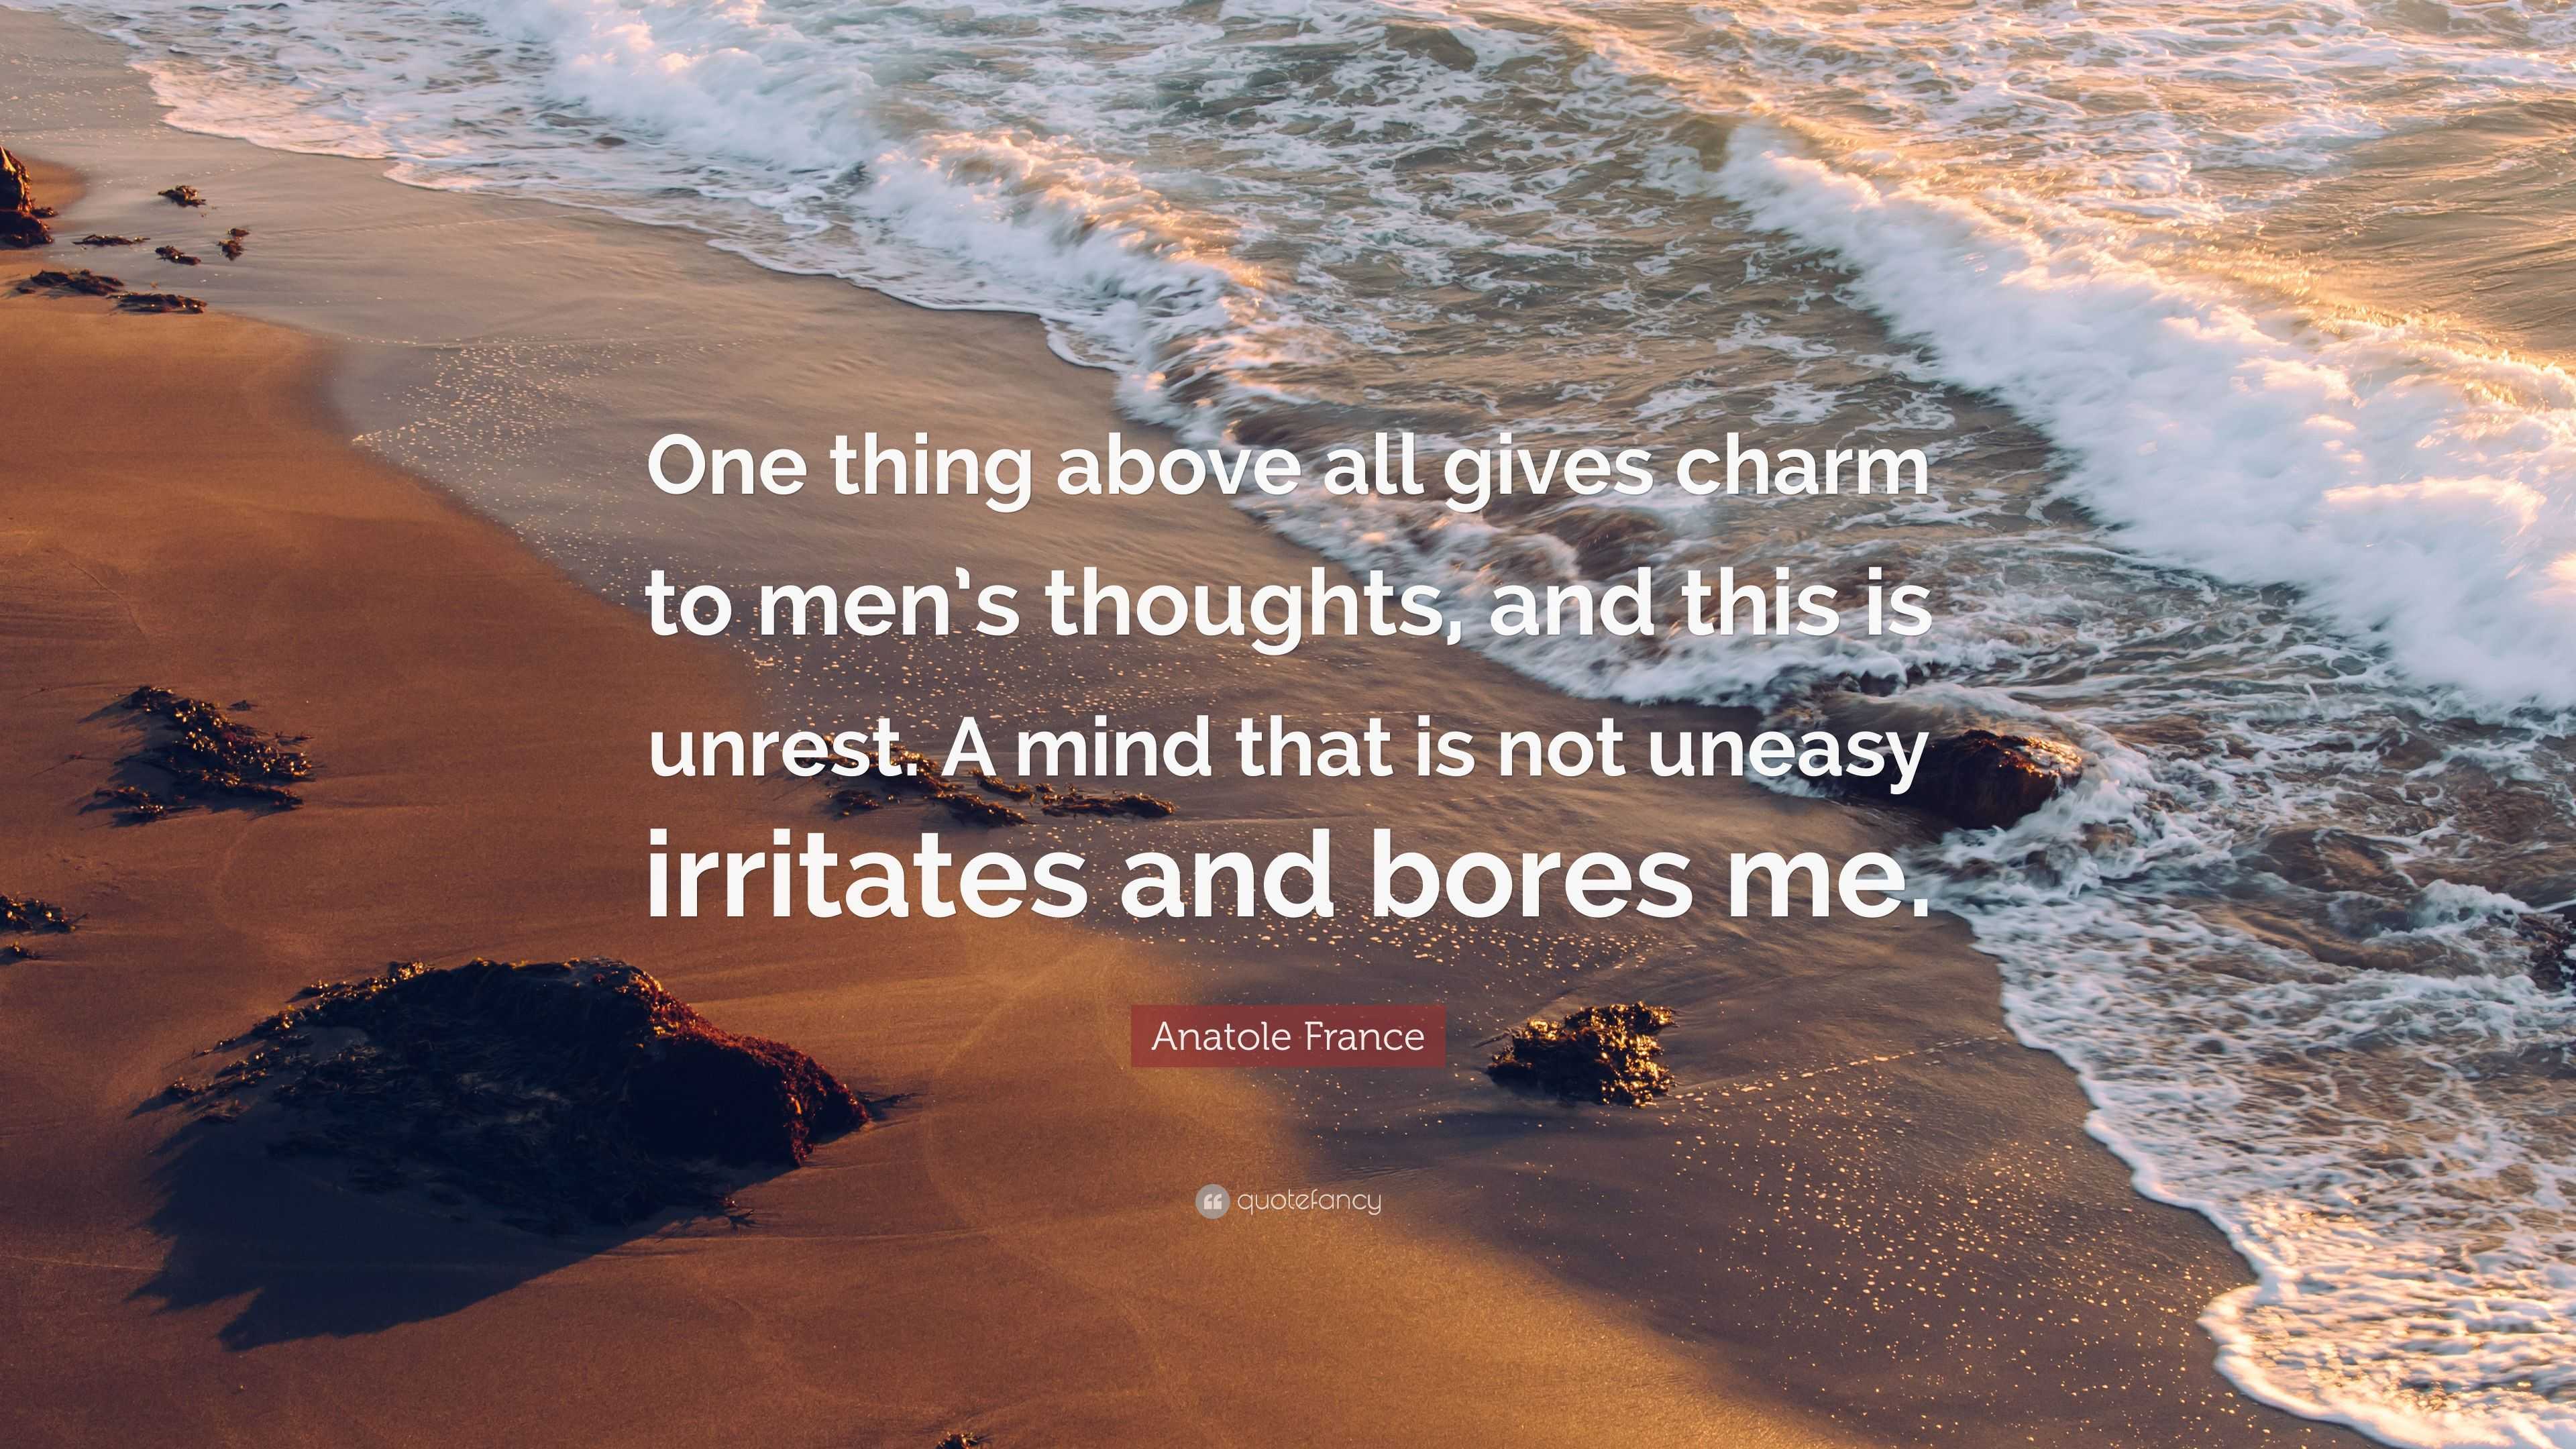 Anatole France Quote: “One thing above all gives charm to men’s ...